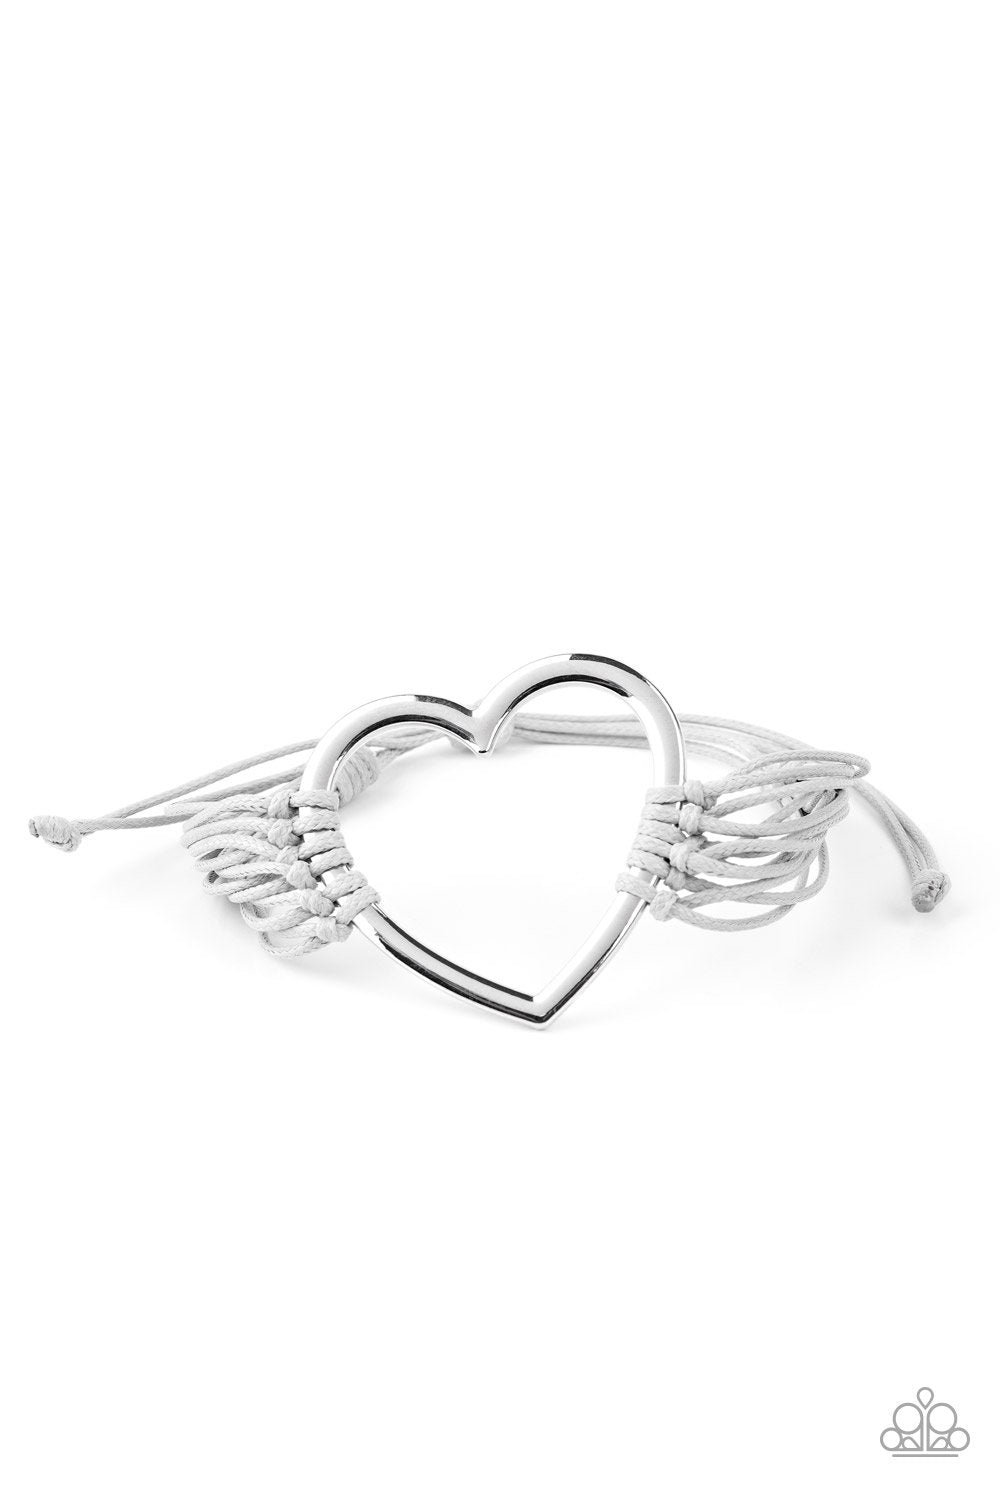 Playing With My HEARTSTRINGS Silver Heart Charm Urban Knot Bracelet - Paparazzi Accessories - lightbox -CarasShop.com - $5 Jewelry by Cara Jewels